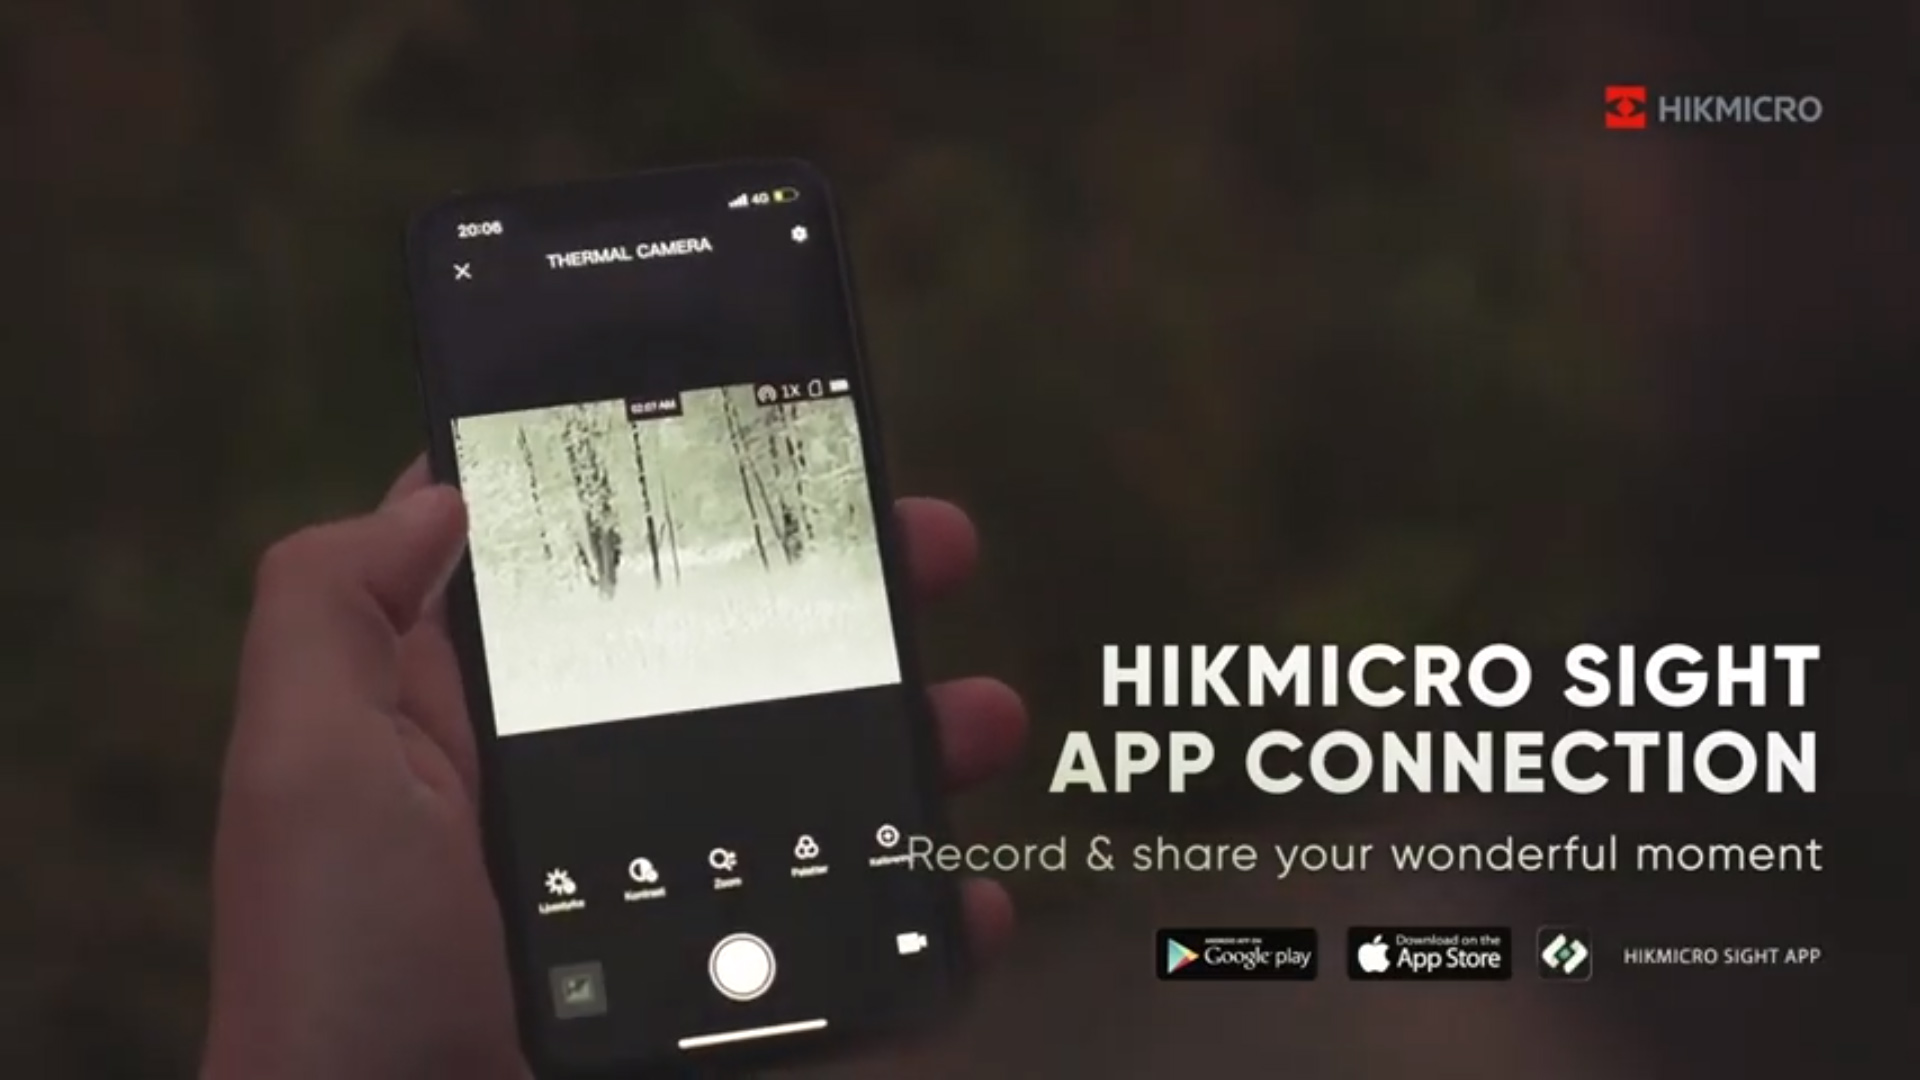 A phone showing the Hikmicro Sight app.